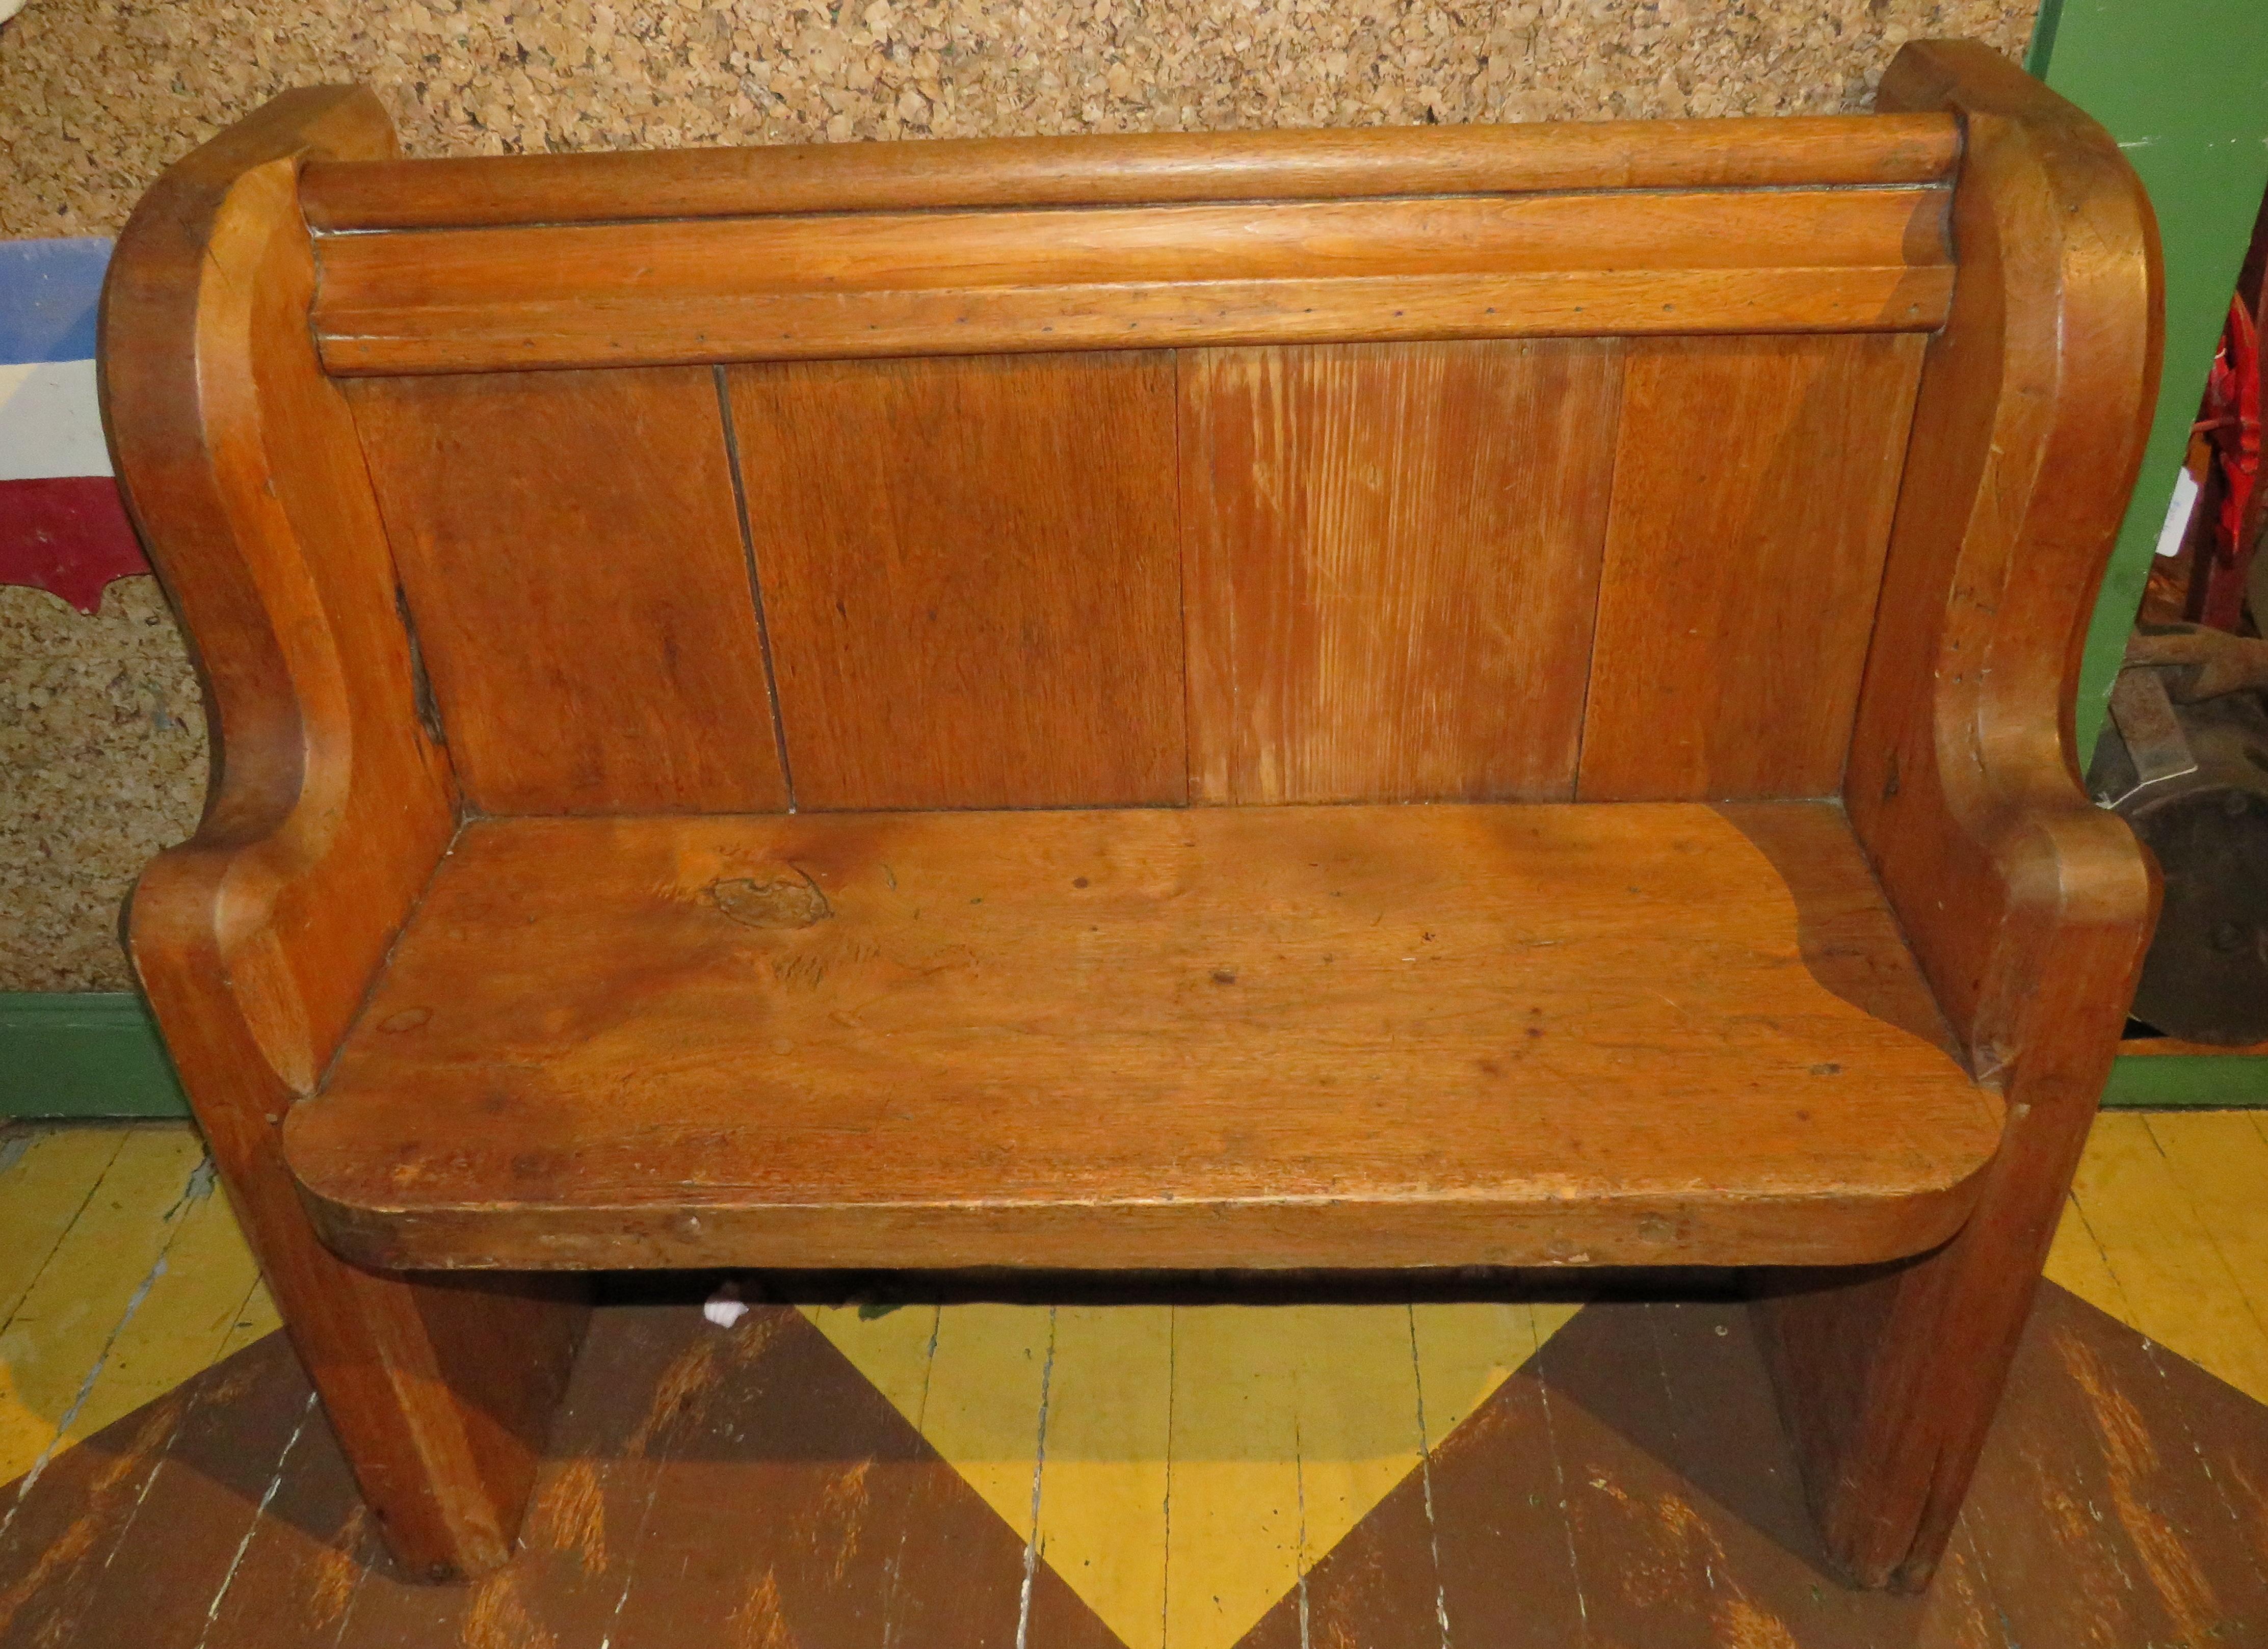 19th Century oak church pew or bench. Of diminutive size, crafted from thick, solid oak planks throughout, with curved sides and chamfered details.